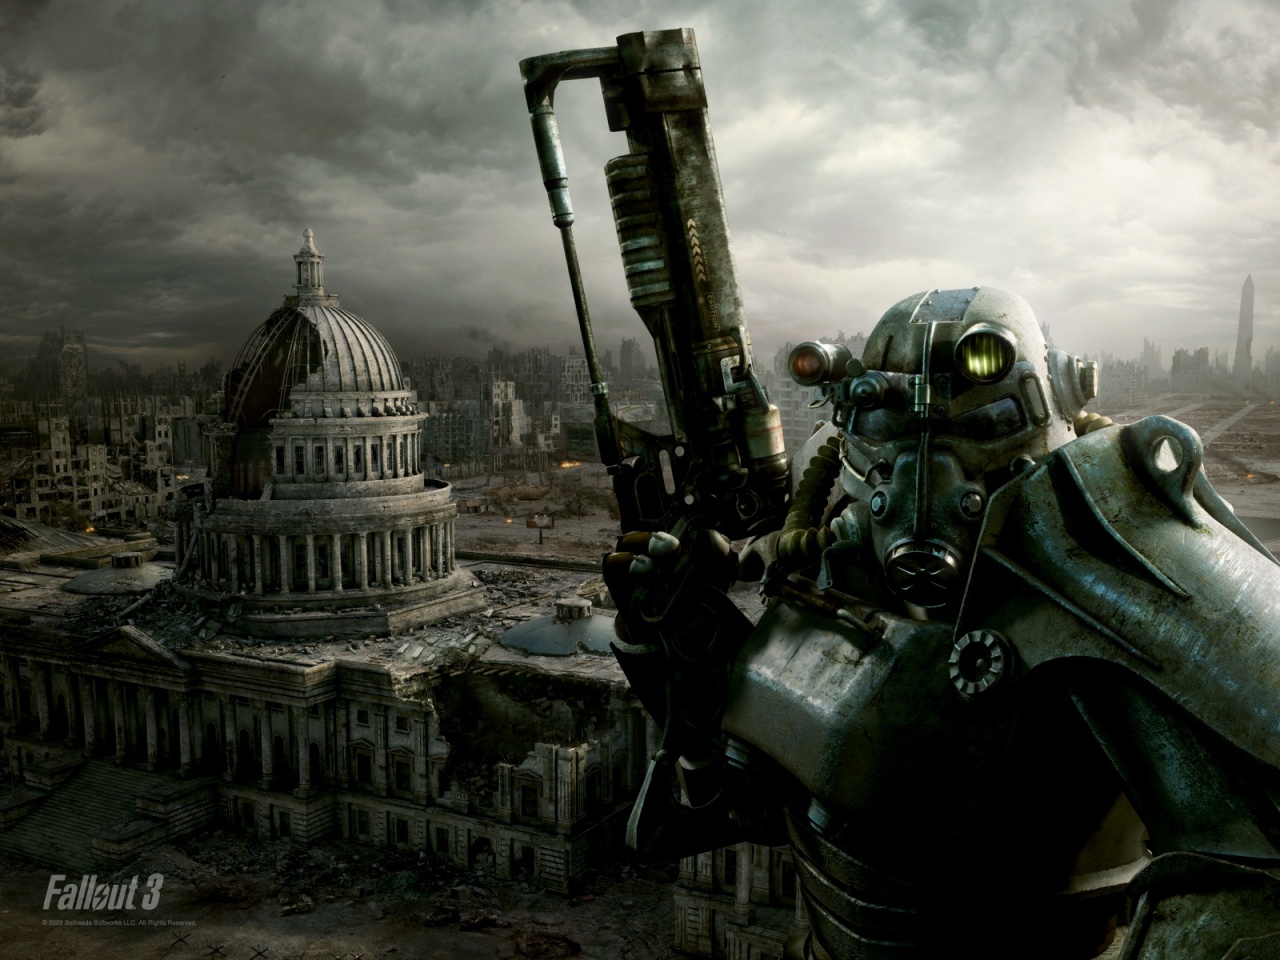 Fallout III - Soldier and The Capitol